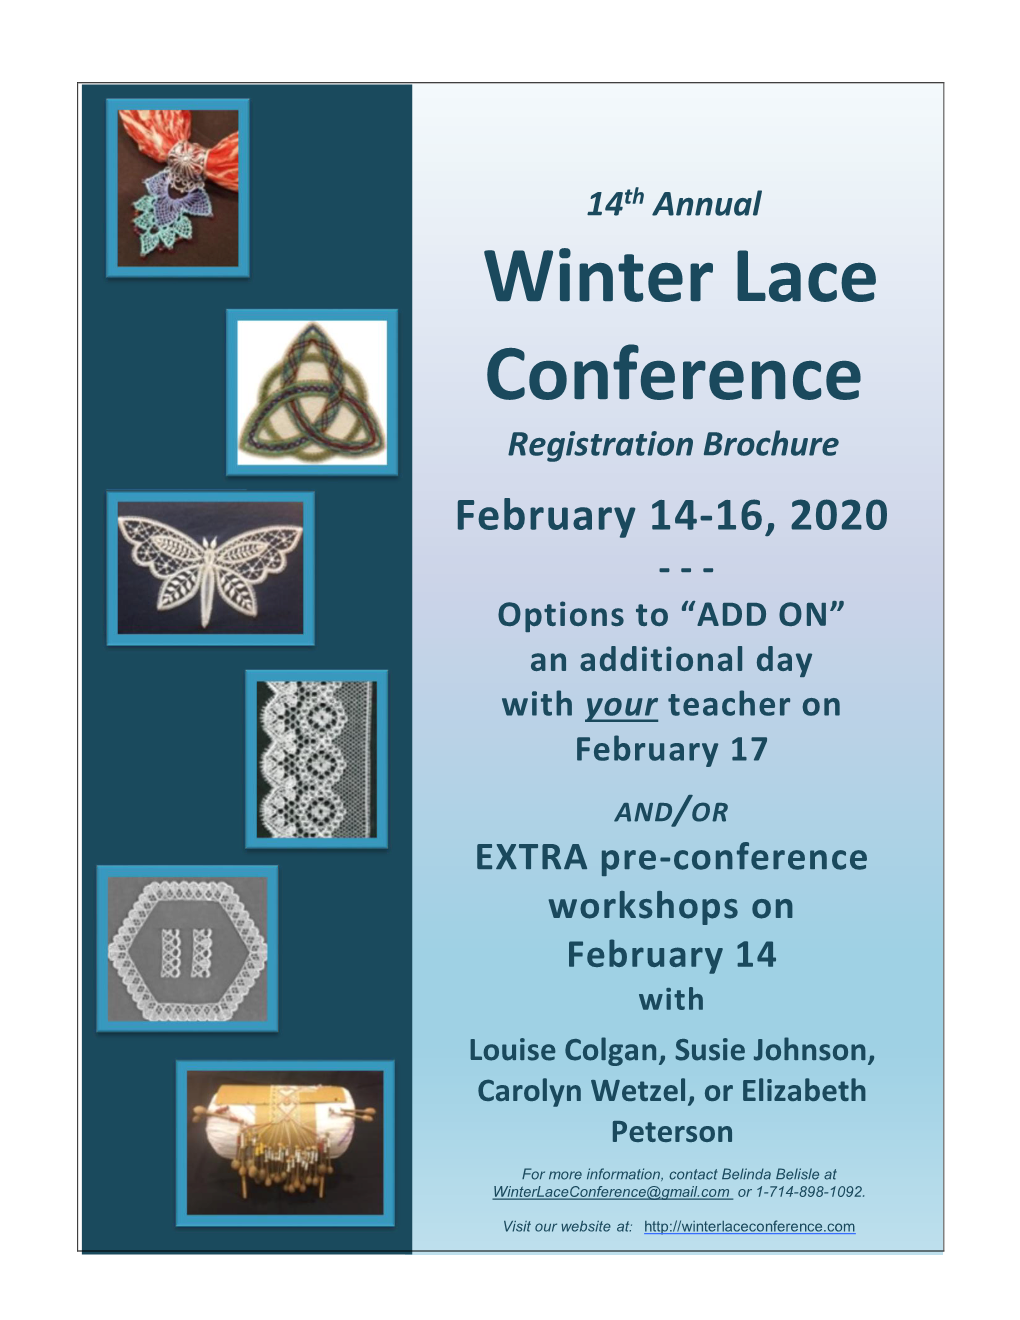 Winter Lace Conference